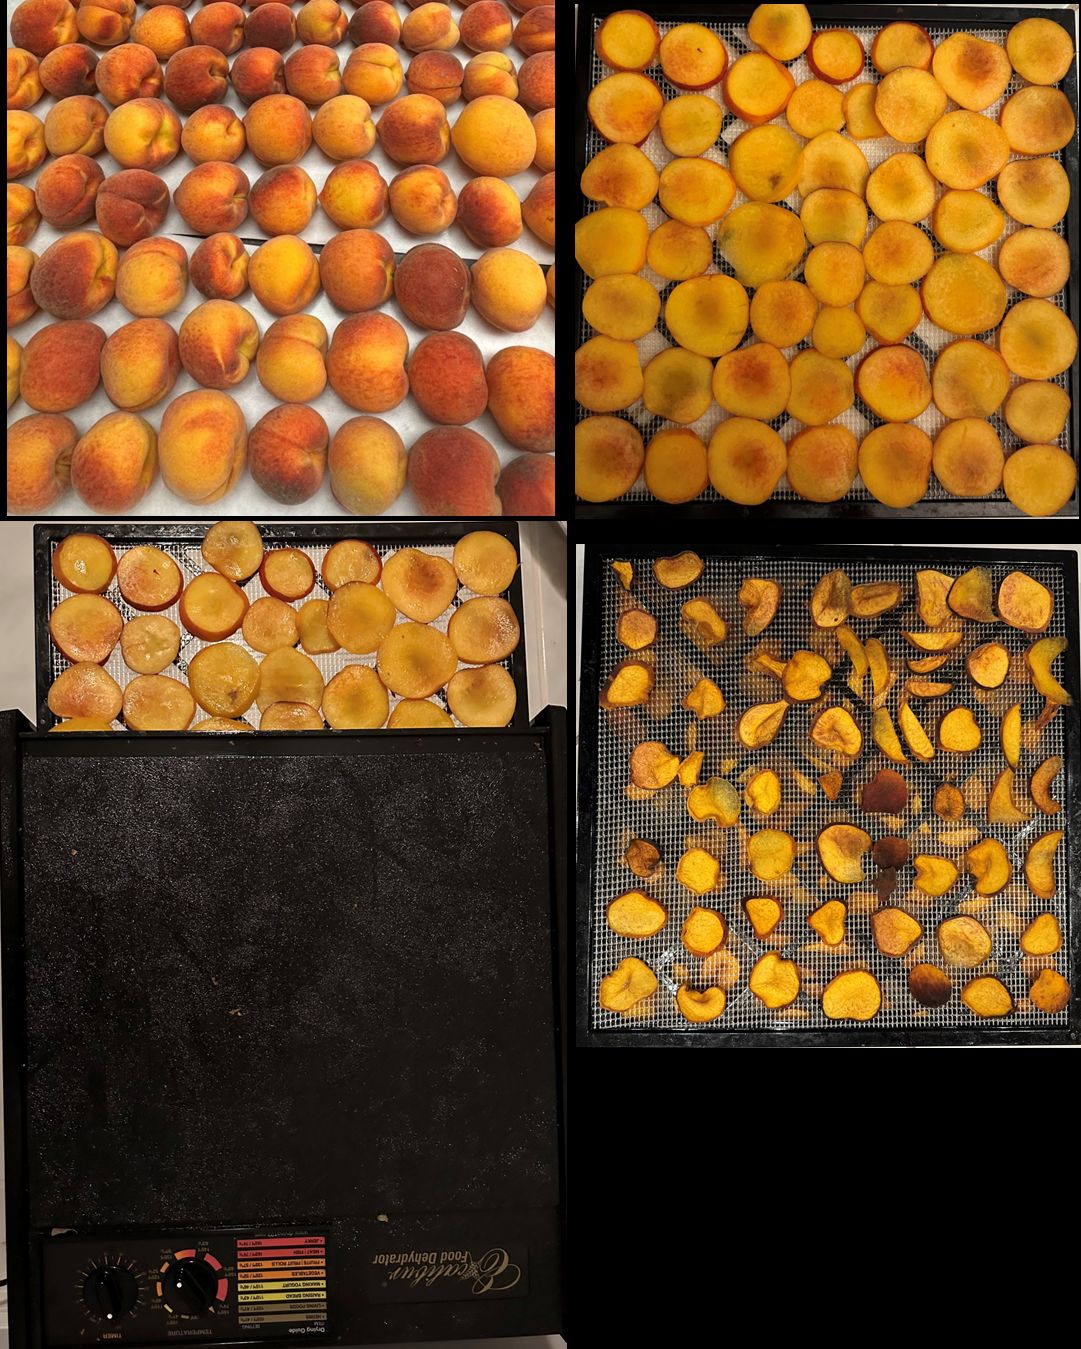 The steps and process of dehydrating ‘UFOne’ peach. (Top left) Fresh fruit, (top right) fresh peach slices, (bottom left) fresh peach slices in dehydrator, and (bottom right) dehydrated peach slices.